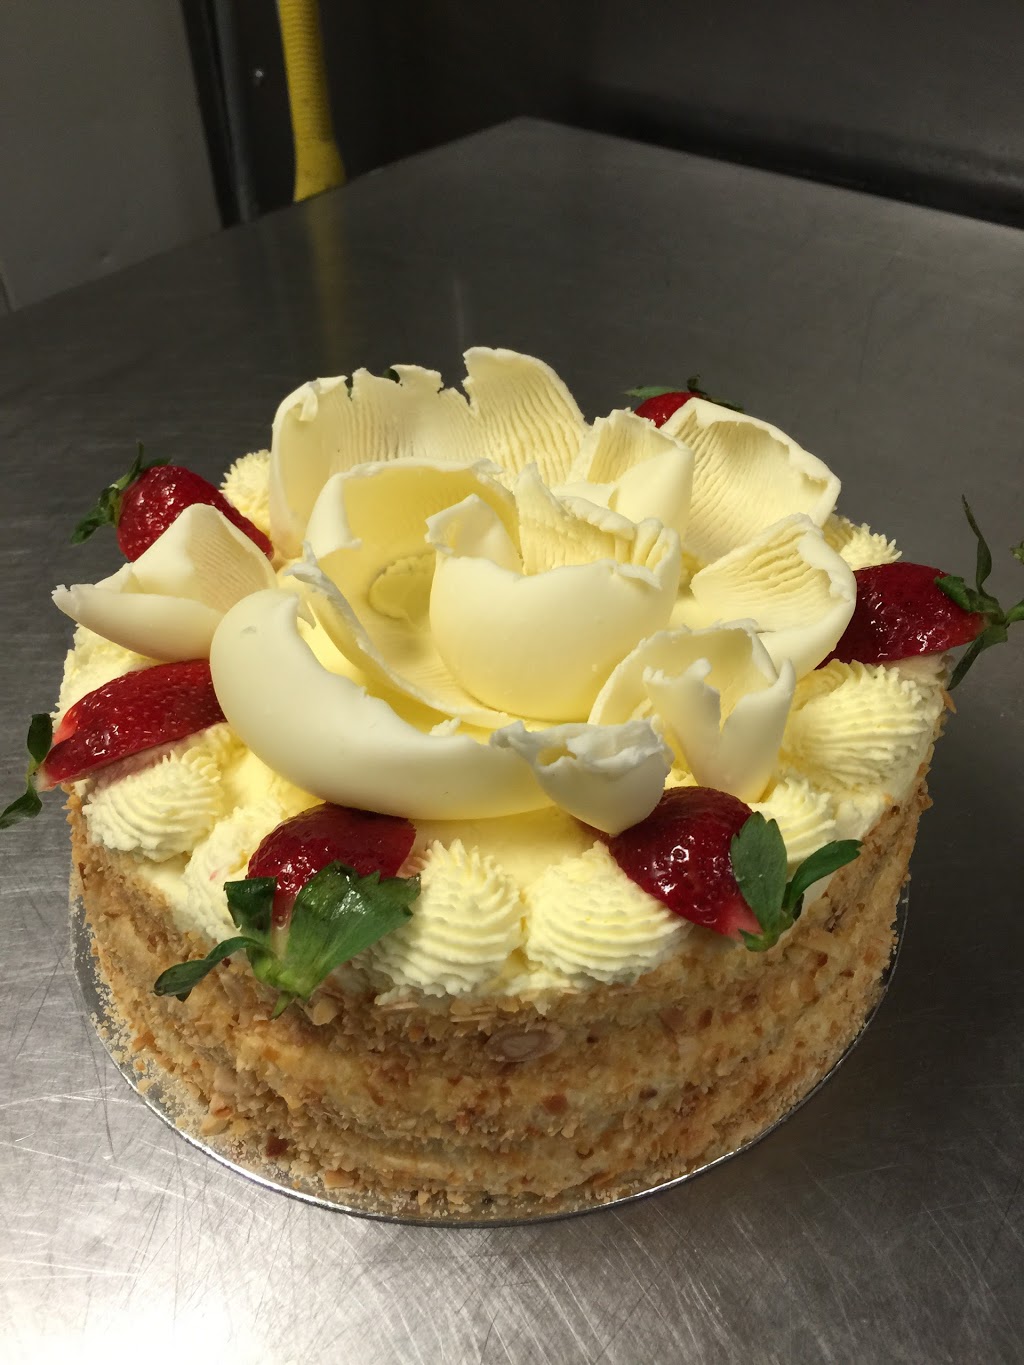 Mcintoshs Quality Cakes | bakery | 203-213 Coxs Rd, North Ryde NSW 2113, Australia | 0298782416 OR +61 2 9878 2416